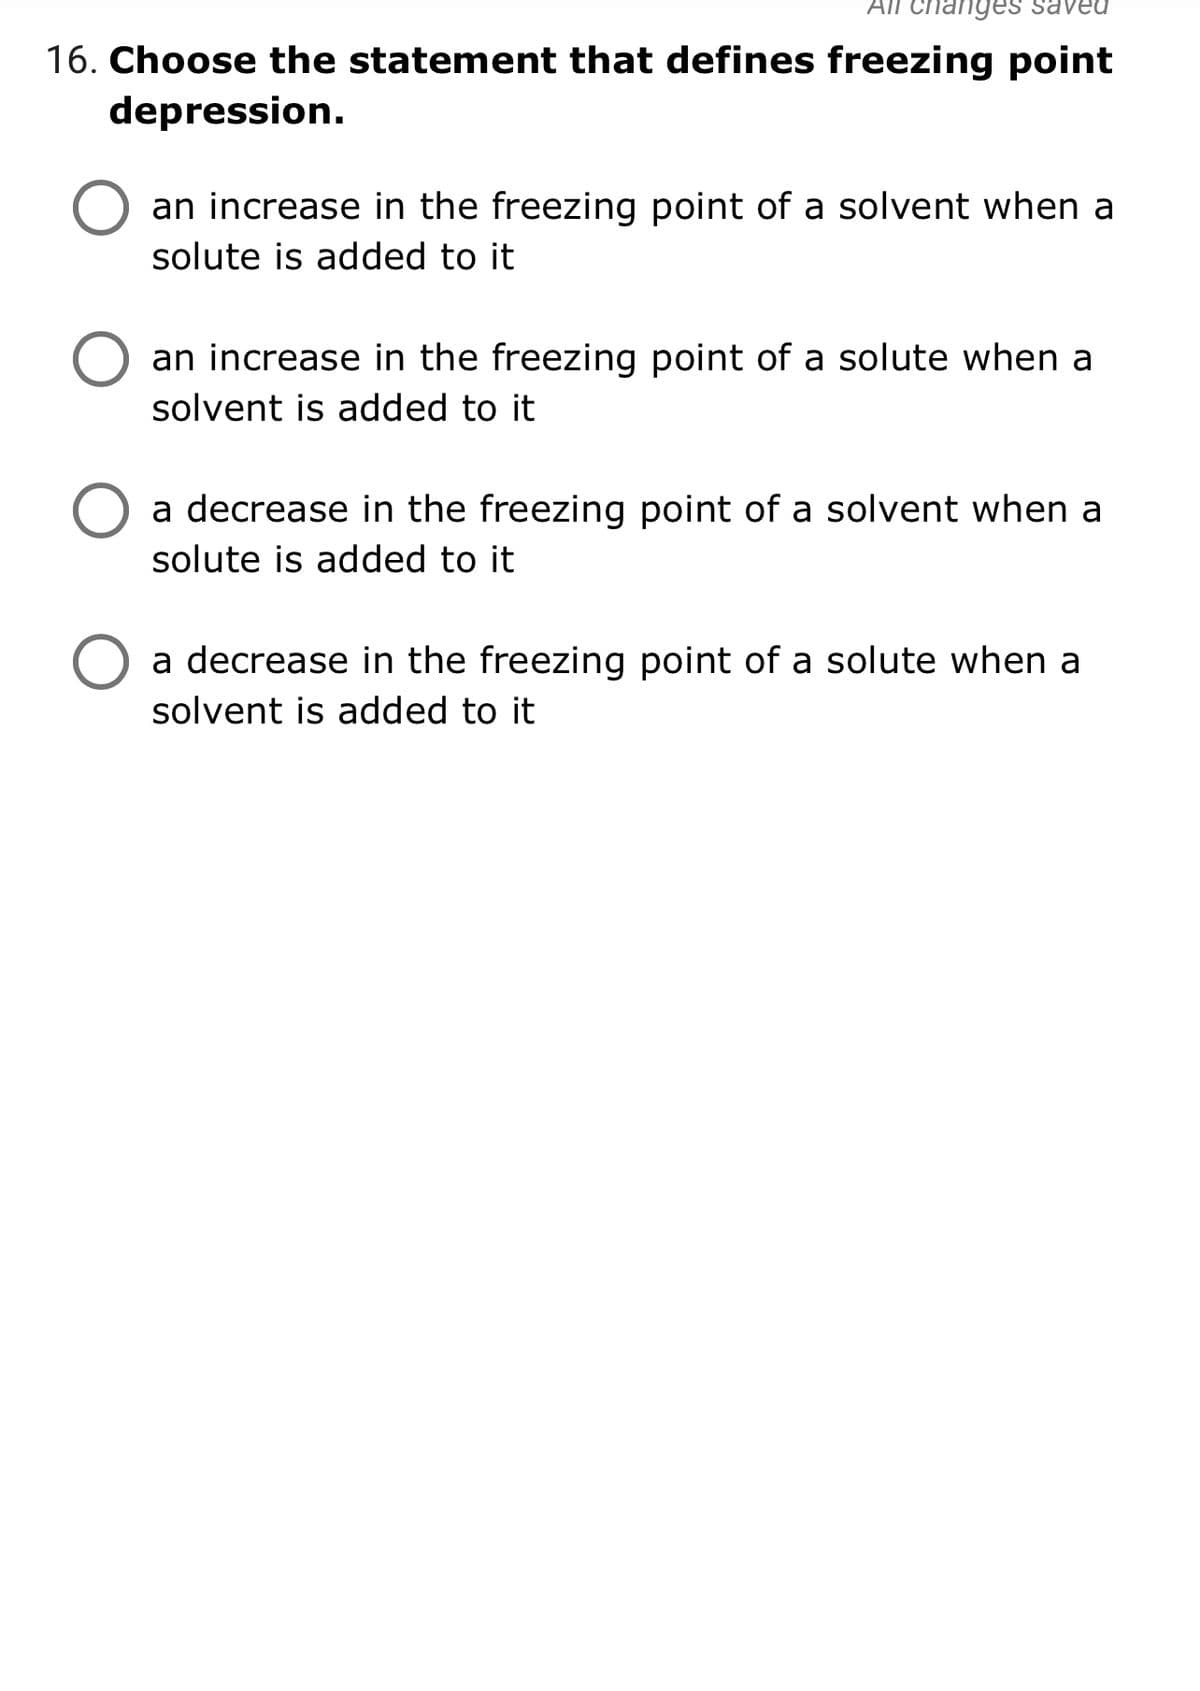 16. Choose the statement that defines freezing point
depression.
an increase in the freezing point of a solvent when a
solute is added to it
an increase in the freezing point of a solute when a
solvent is added to it
a decrease in the freezing point of a solvent when a
solute is added to it
a decrease in the freezing point of a solute when a
solvent is added to it
